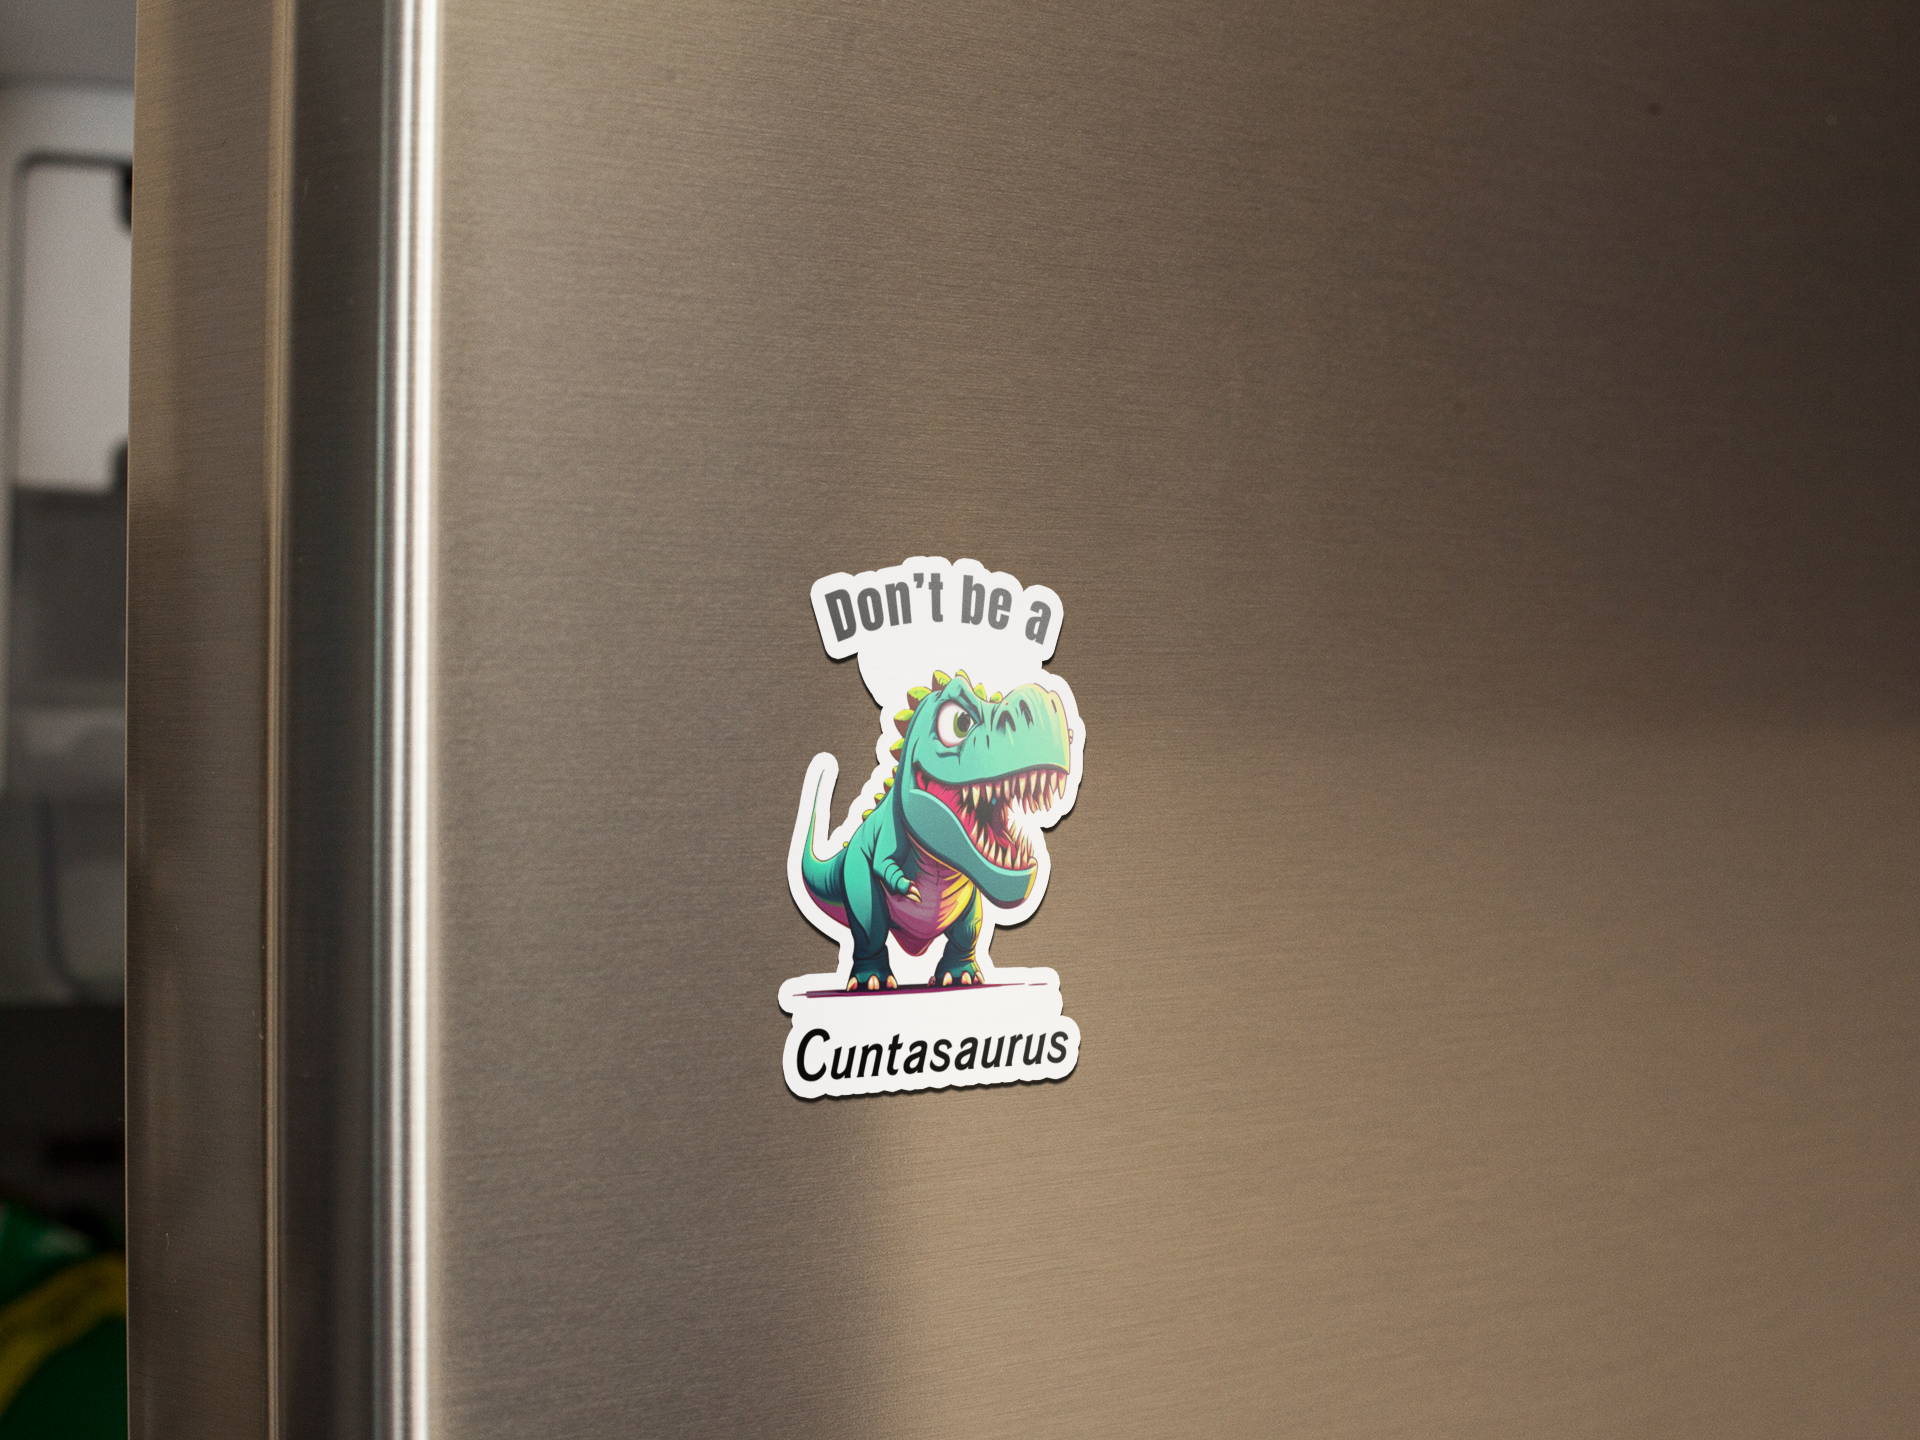 Don't be a cuntasaurus refrigerator magnet family Fridge magnet funny gift for mom gift for wife Handmade Kitchen decor magnet Magnetic clip Magnetic photo holder Modern design Note holder Office accessory Reminder board Shopping list Strong magnet Unique gift